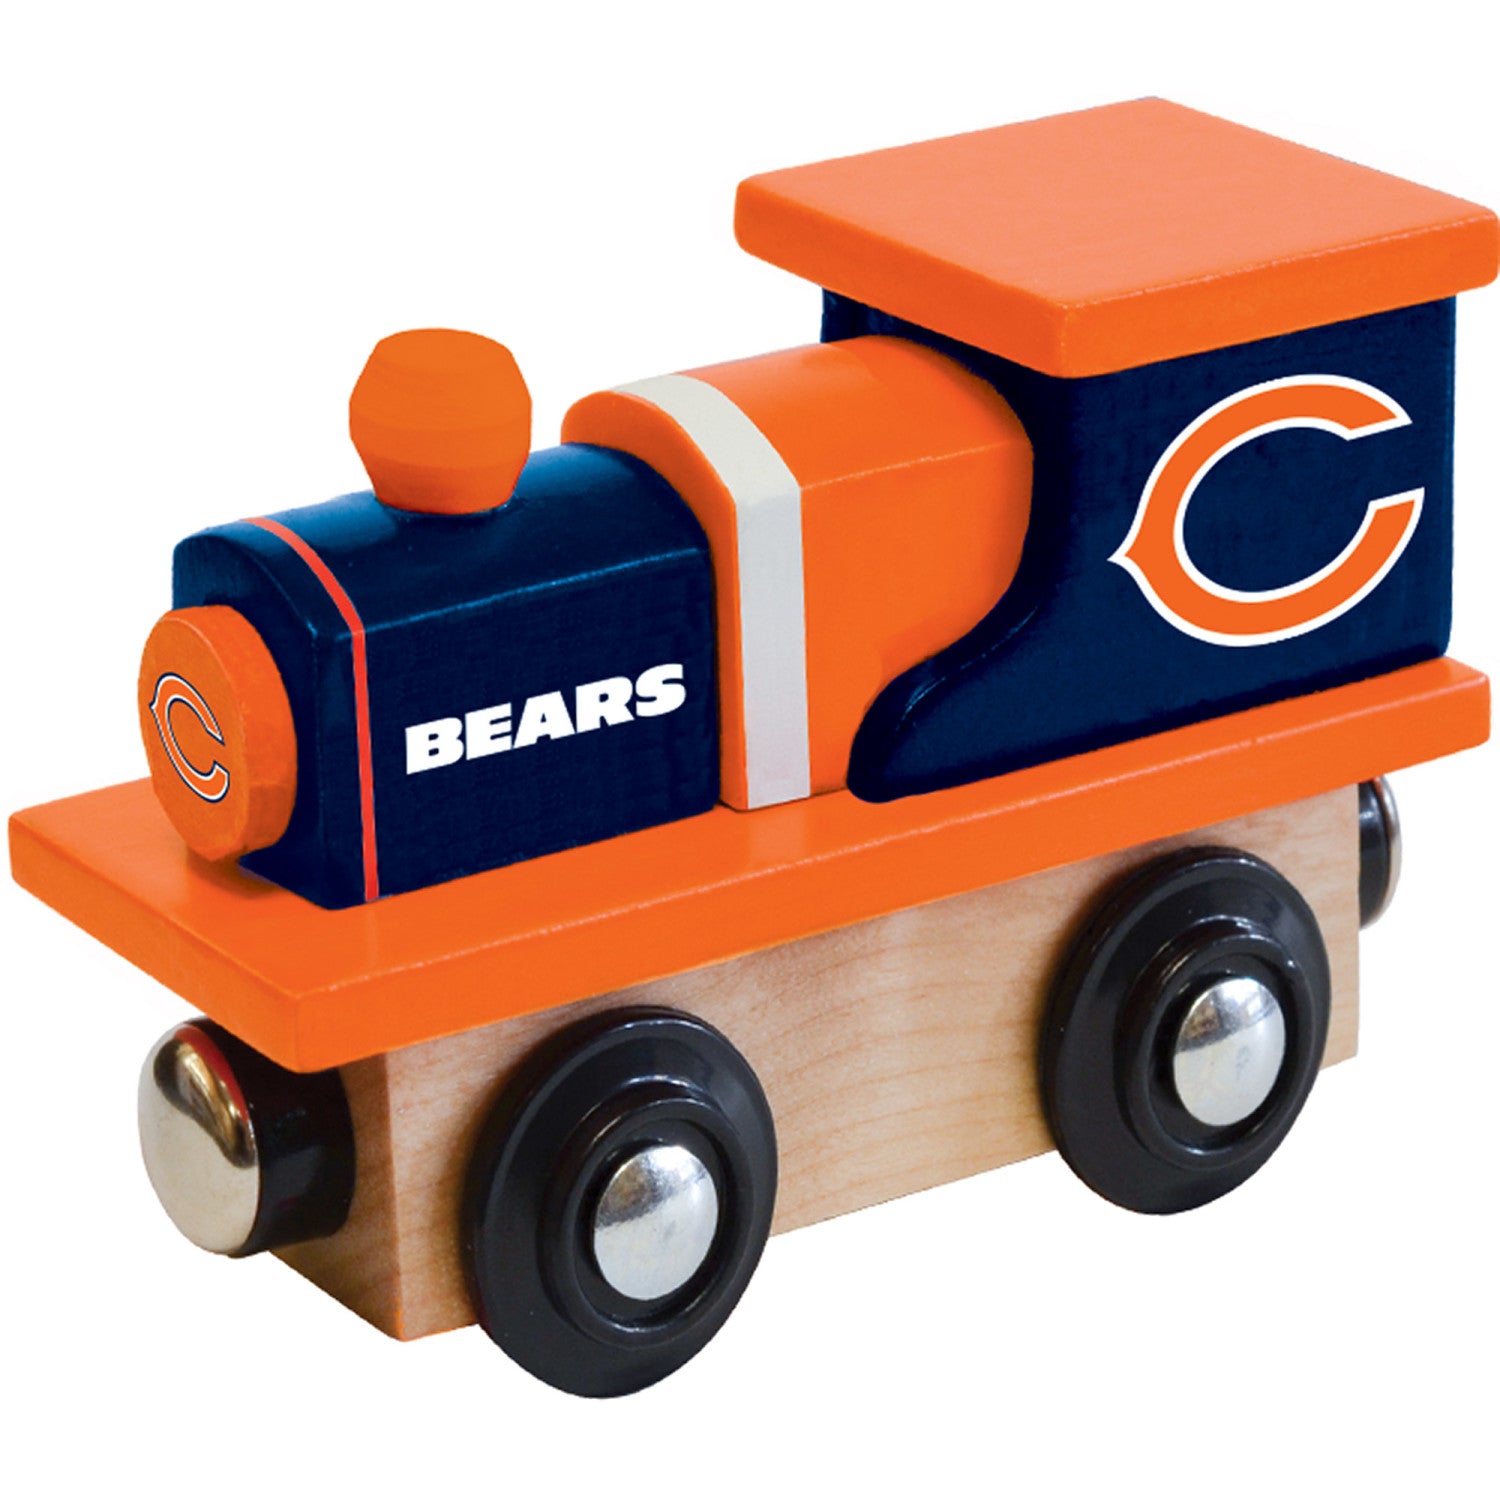 Chicago Bears Toy Train Engine